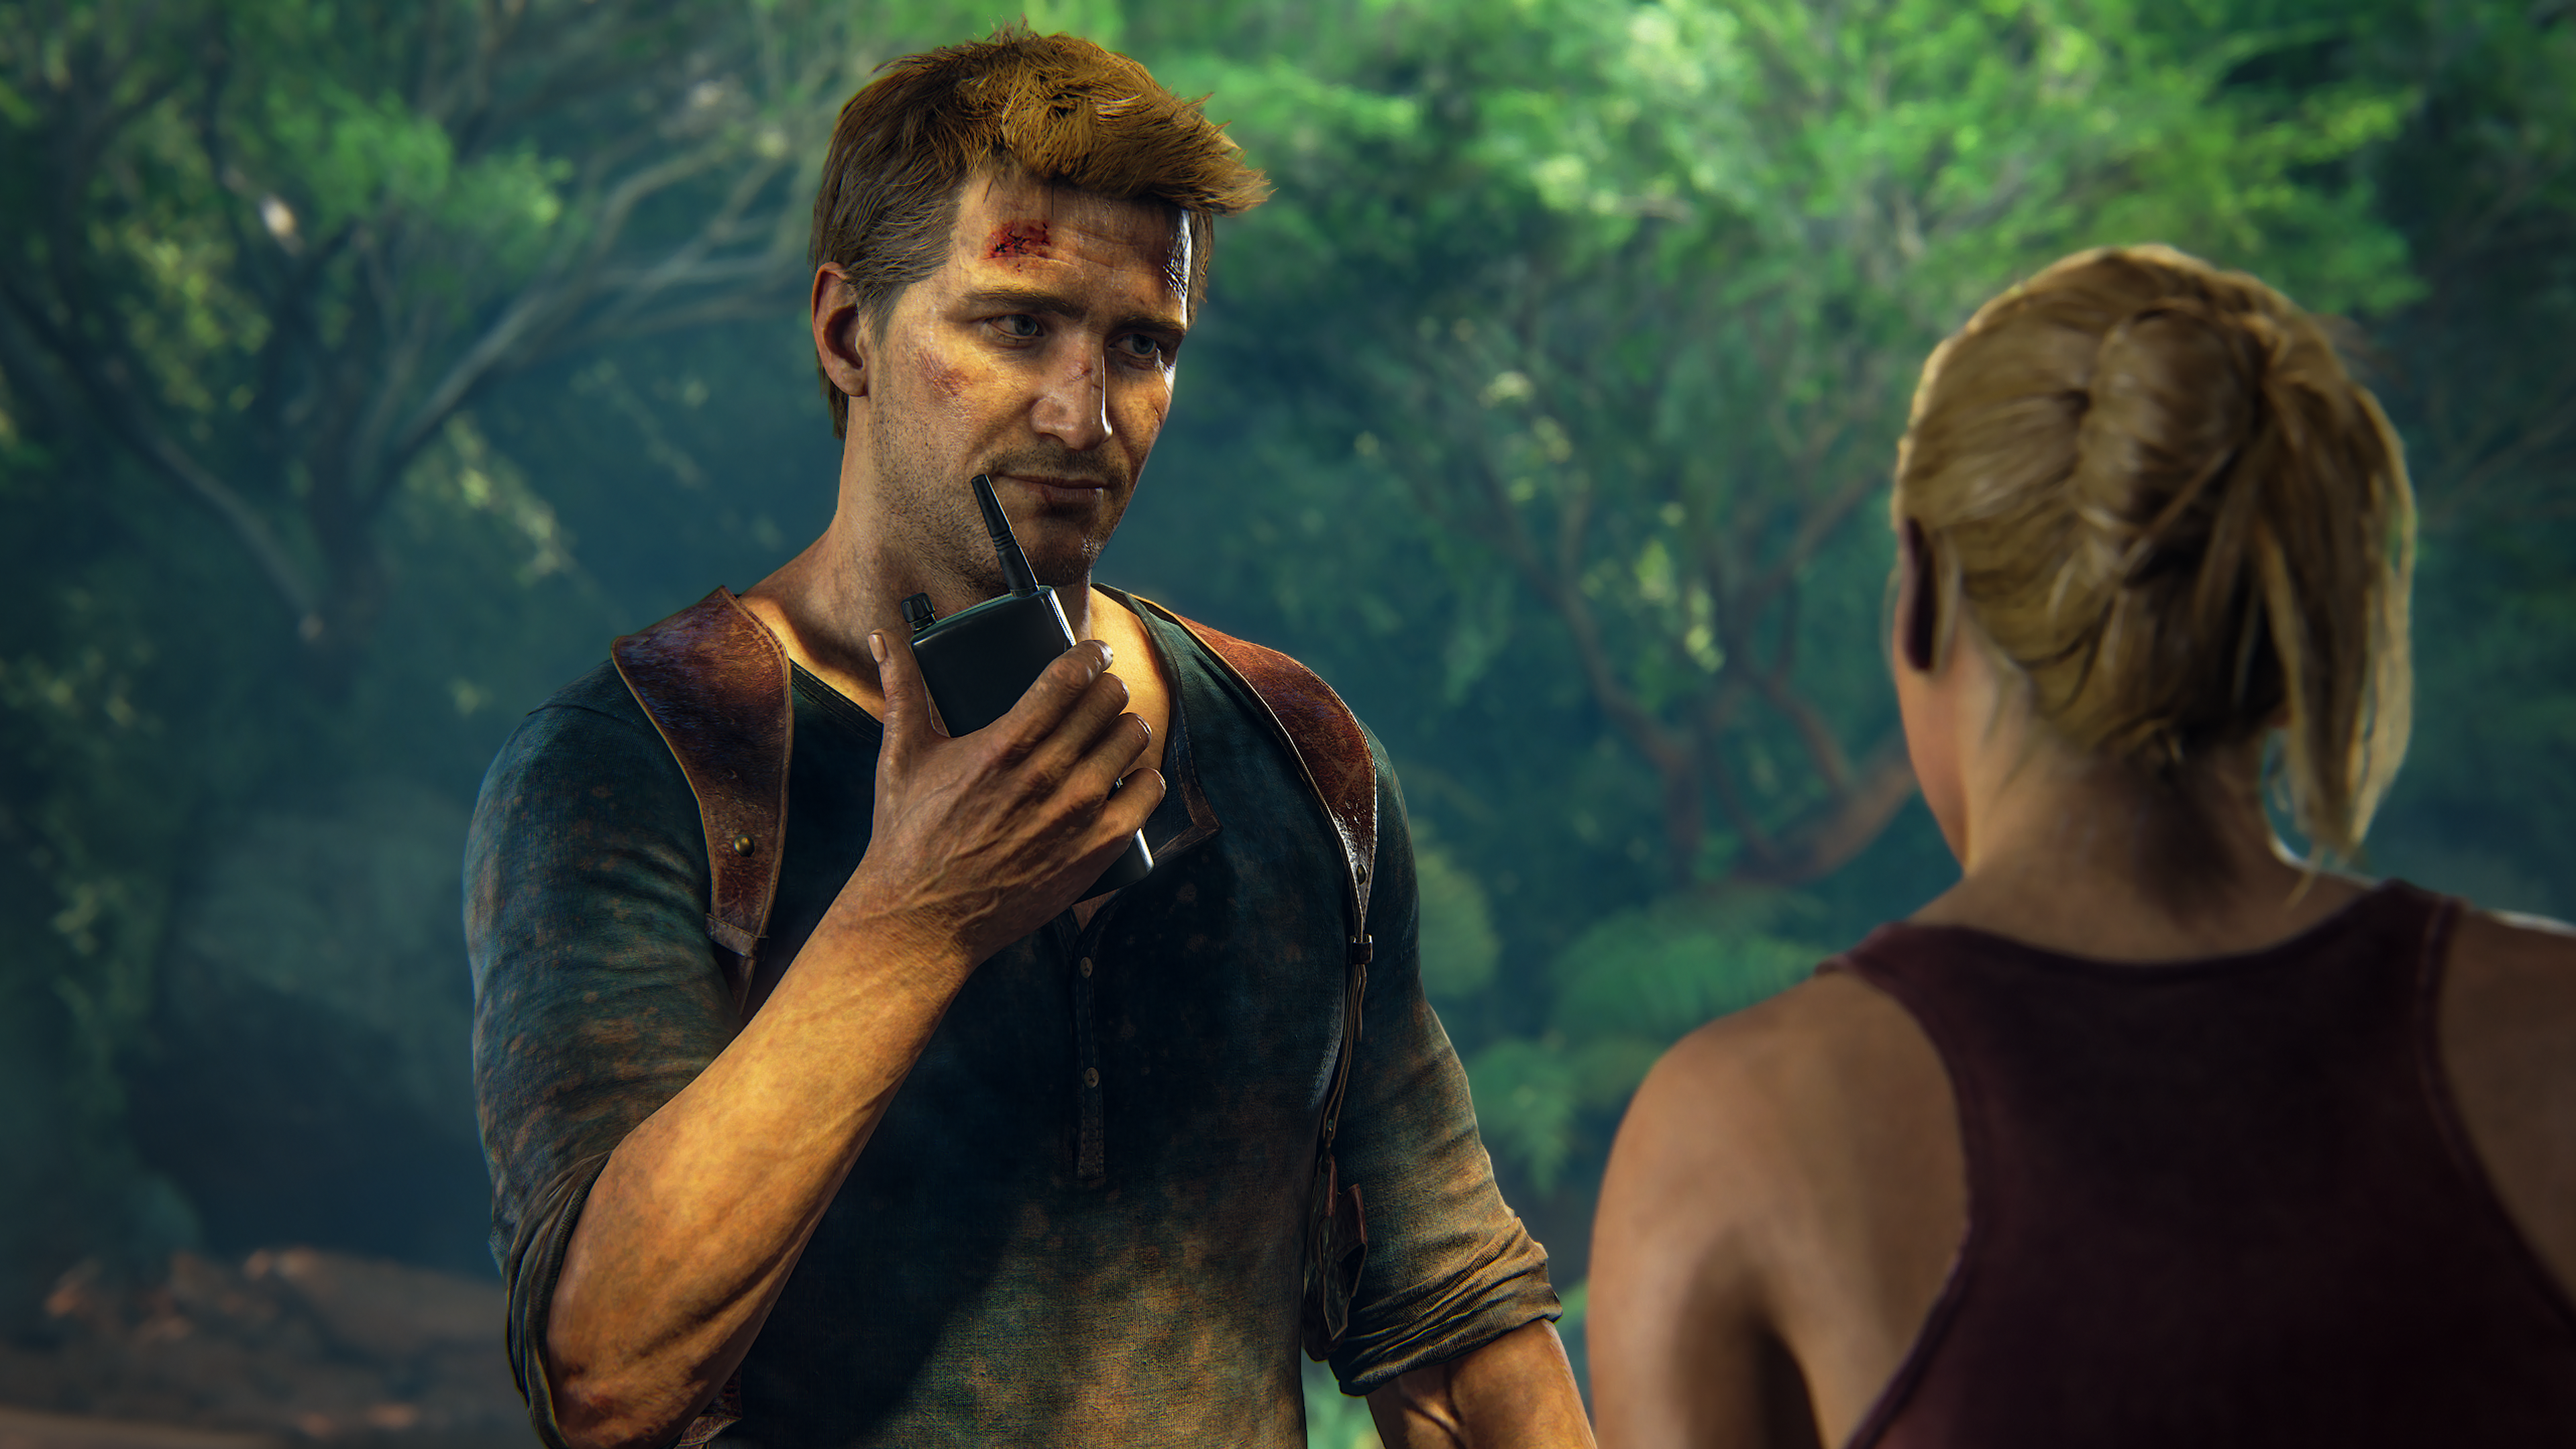 Uncharted 4: A Thief's End 4k Ultra HD Wallpaper by korner